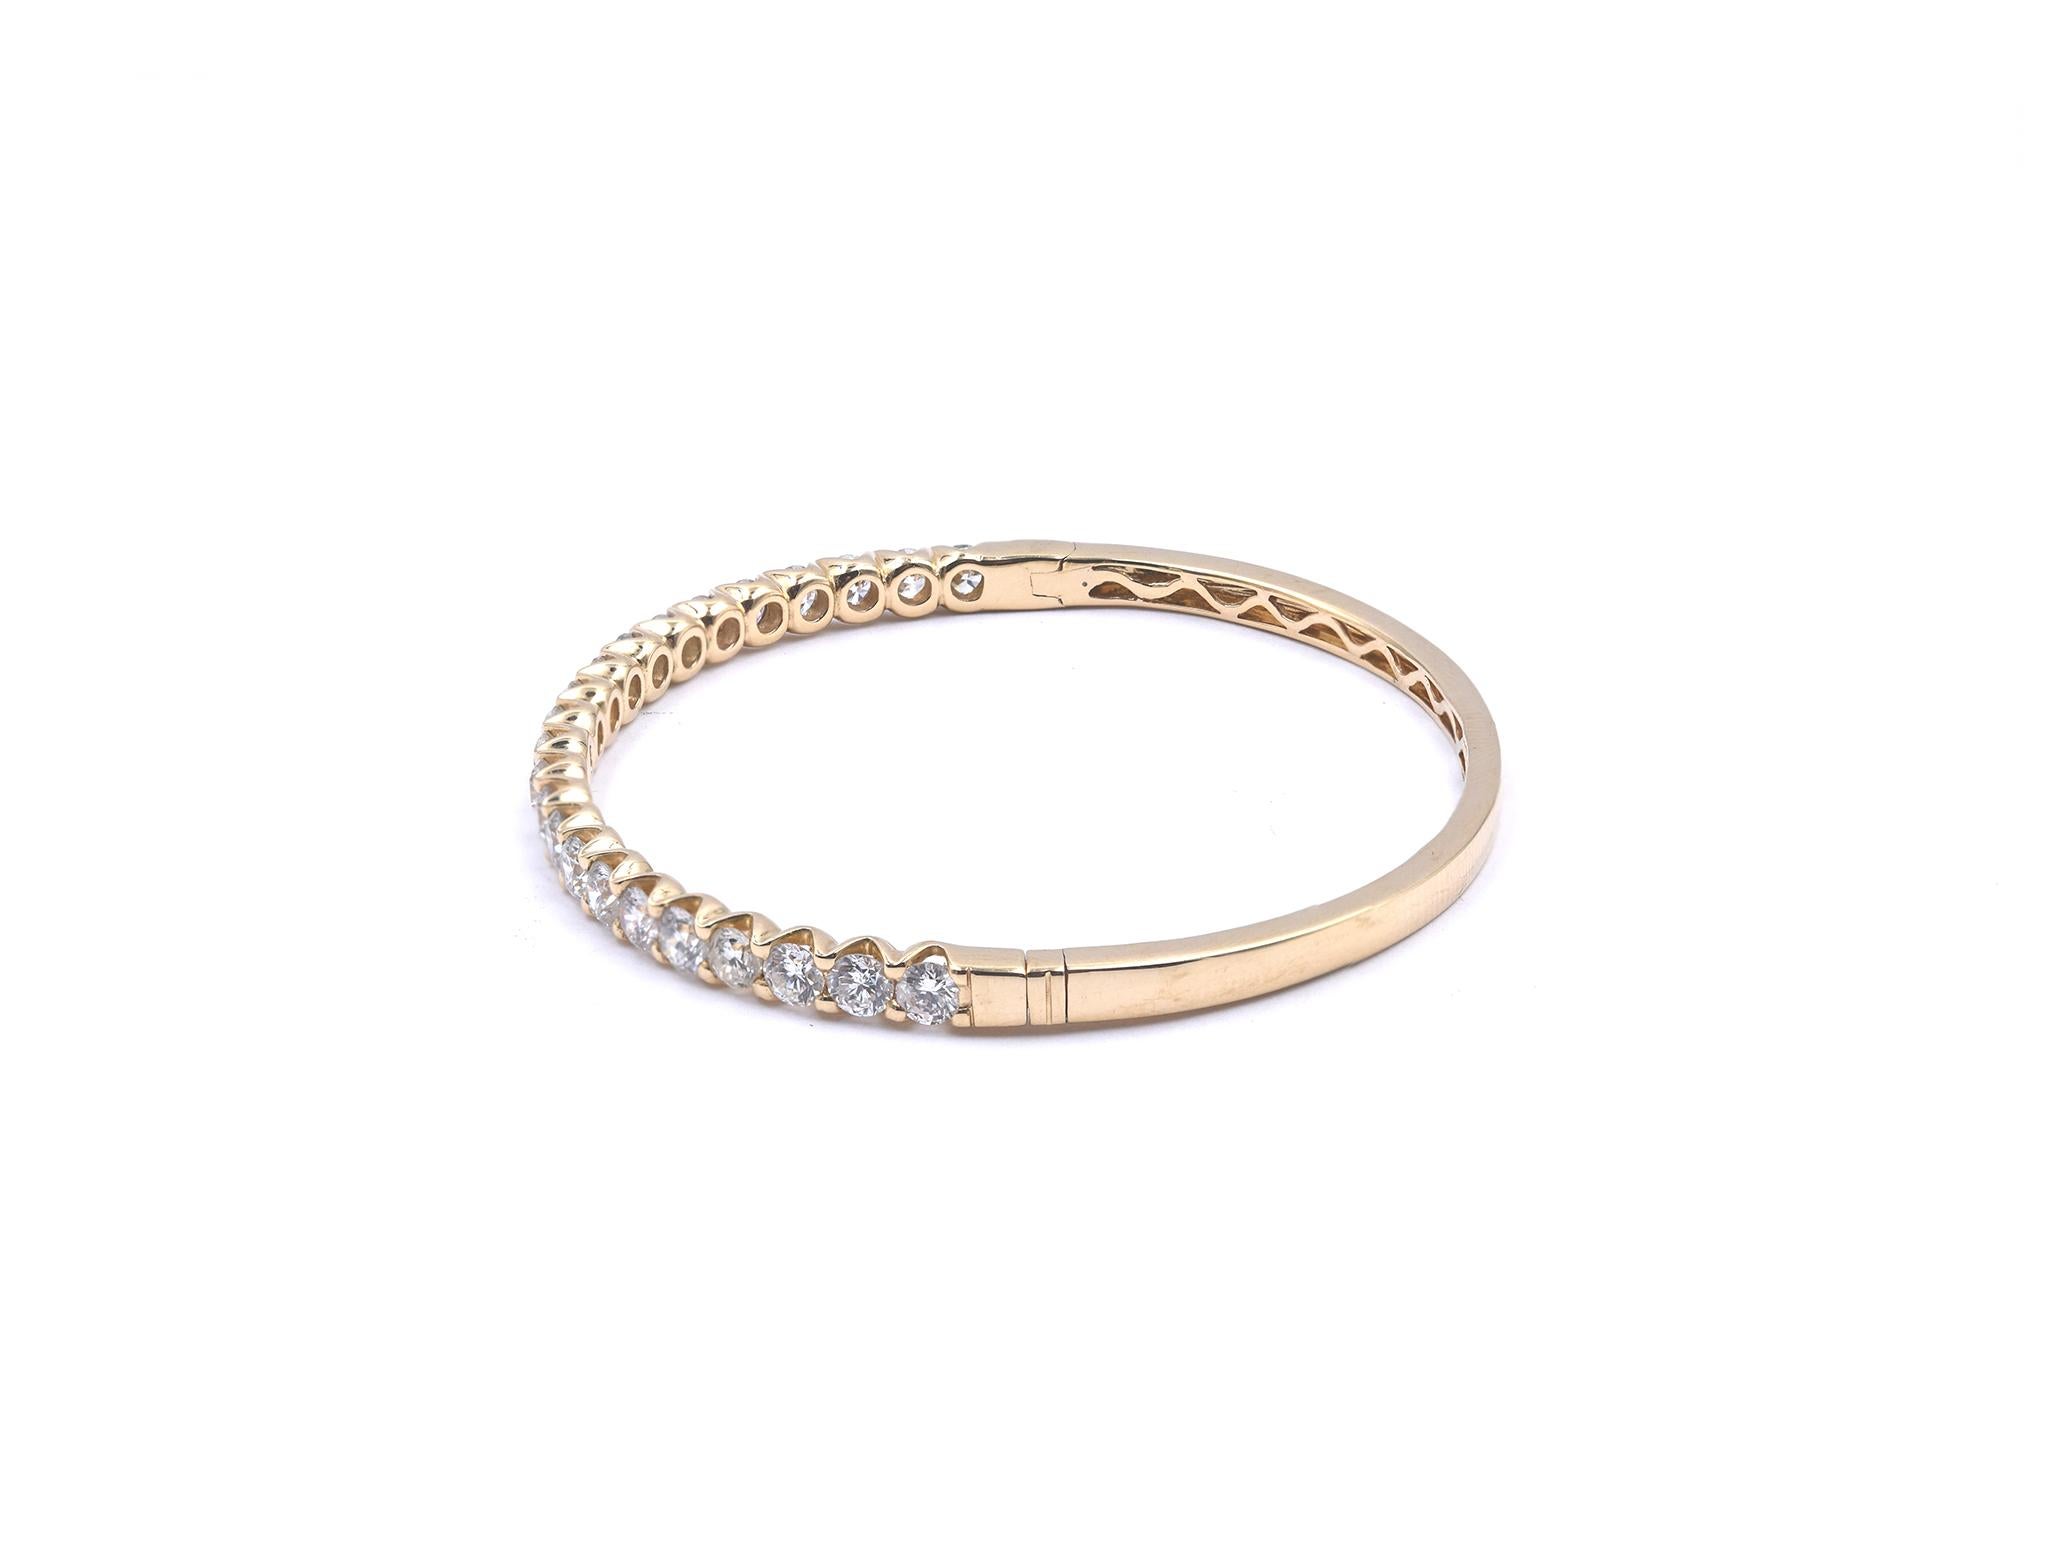 Material: 18K yellow gold
Diamonds: 23 round brilliant cut = 4.95cttw
Color: G
Clarity: VS2
Dimensions: bracelet will fit up to a 6.5-inch wrist
Weight: 15.75 grams
